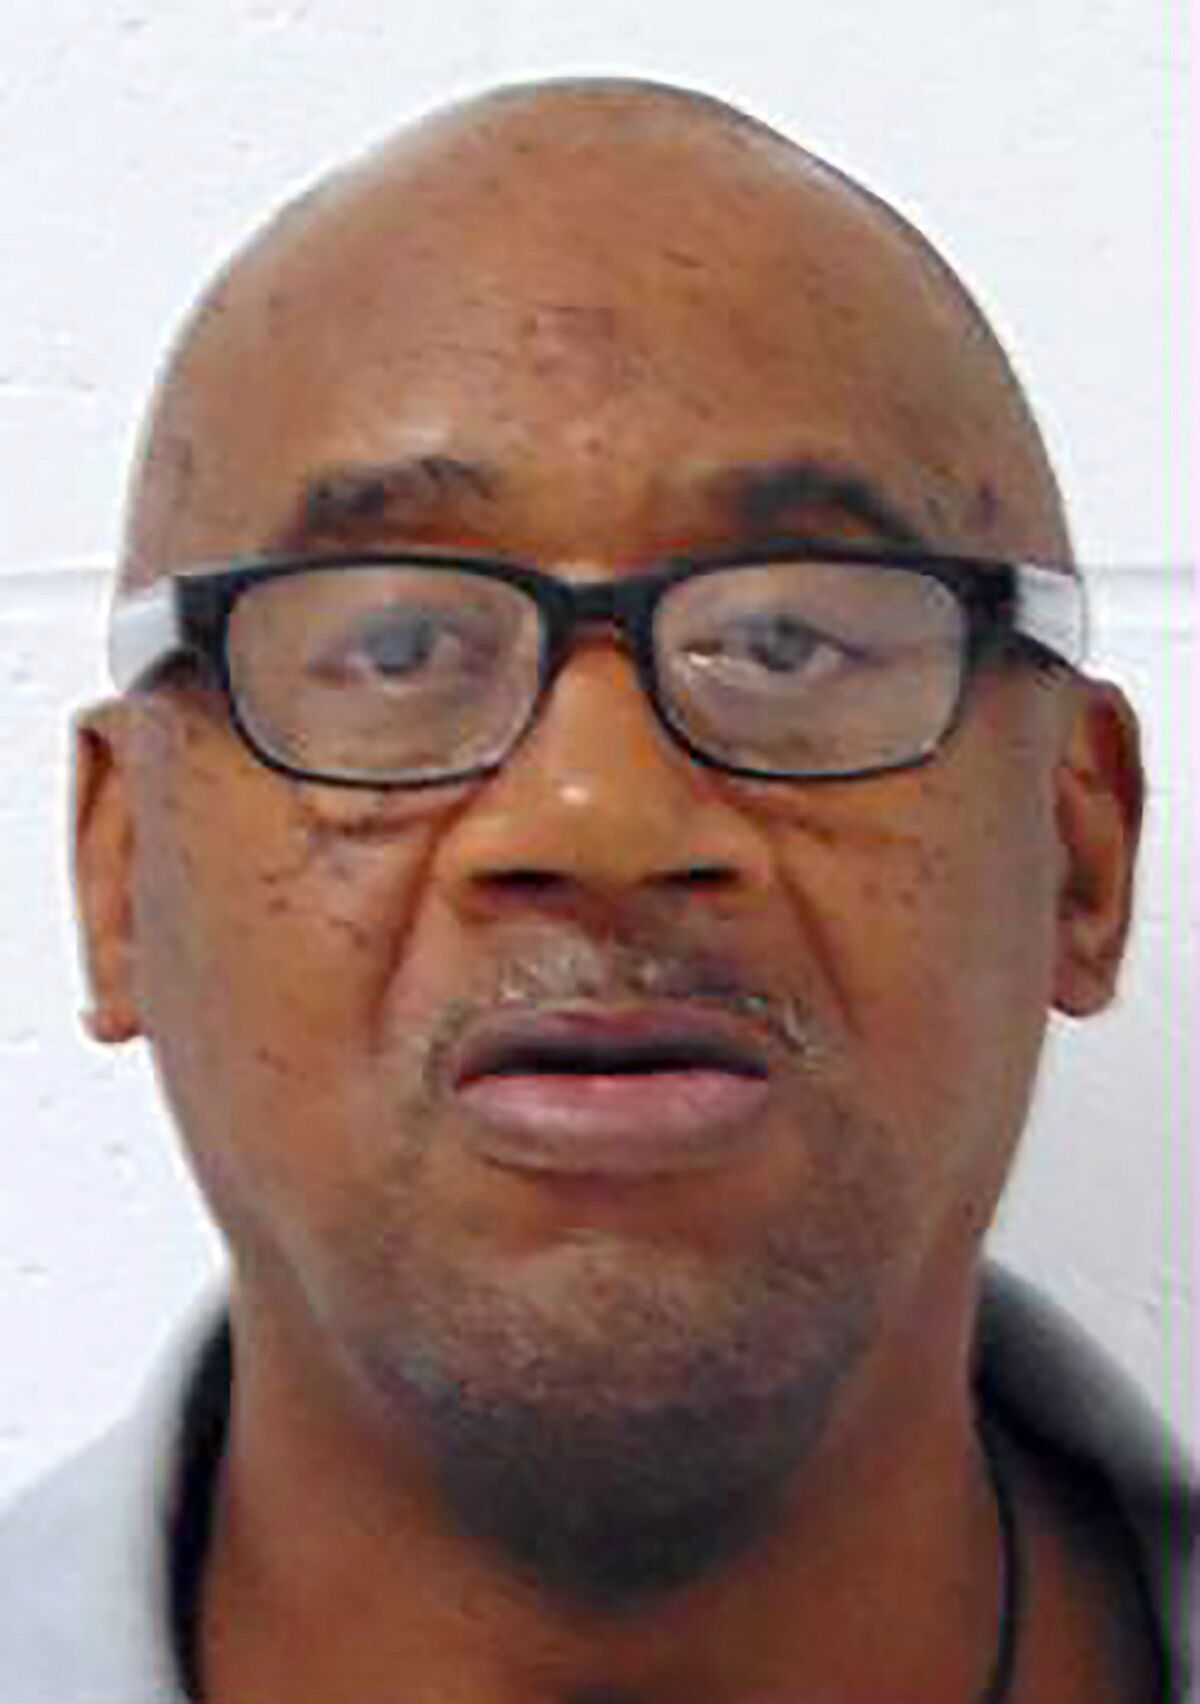 This undated photo provided by the Missouri Department of Corrections shows Ernest Johnson. Supporters of the condemned Missouri inmate planned to submit a petition on Wednesday, Sept. 29, 2021, urging Gov. Mike Parson to grant clemency. The request says Johnson is intellectually disabled. He is scheduled for execution on Tuesday. (the Missouri Department of Corrections via AP)